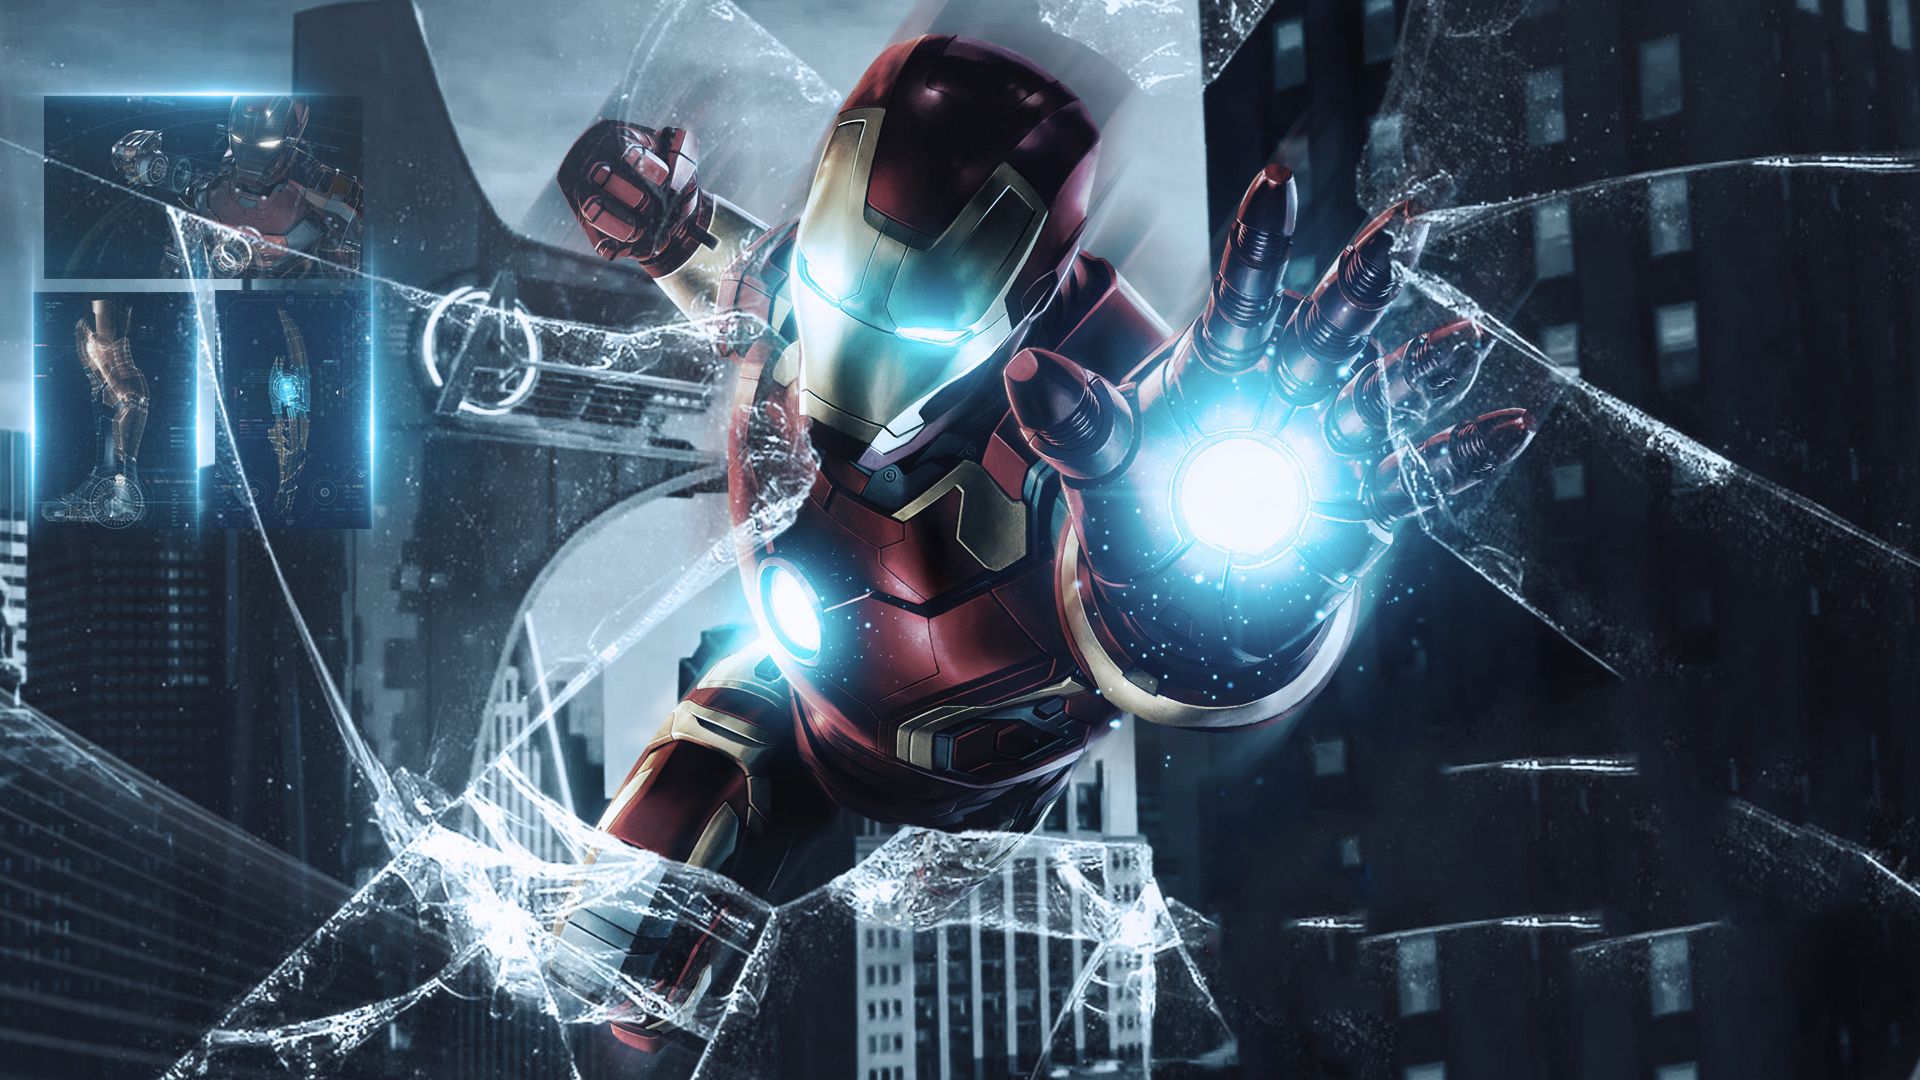 Iron Man Avengers Endgame Poster 2048x1152 Resolution HD 4k Wallpaper, Image, Background, Photo and Picture